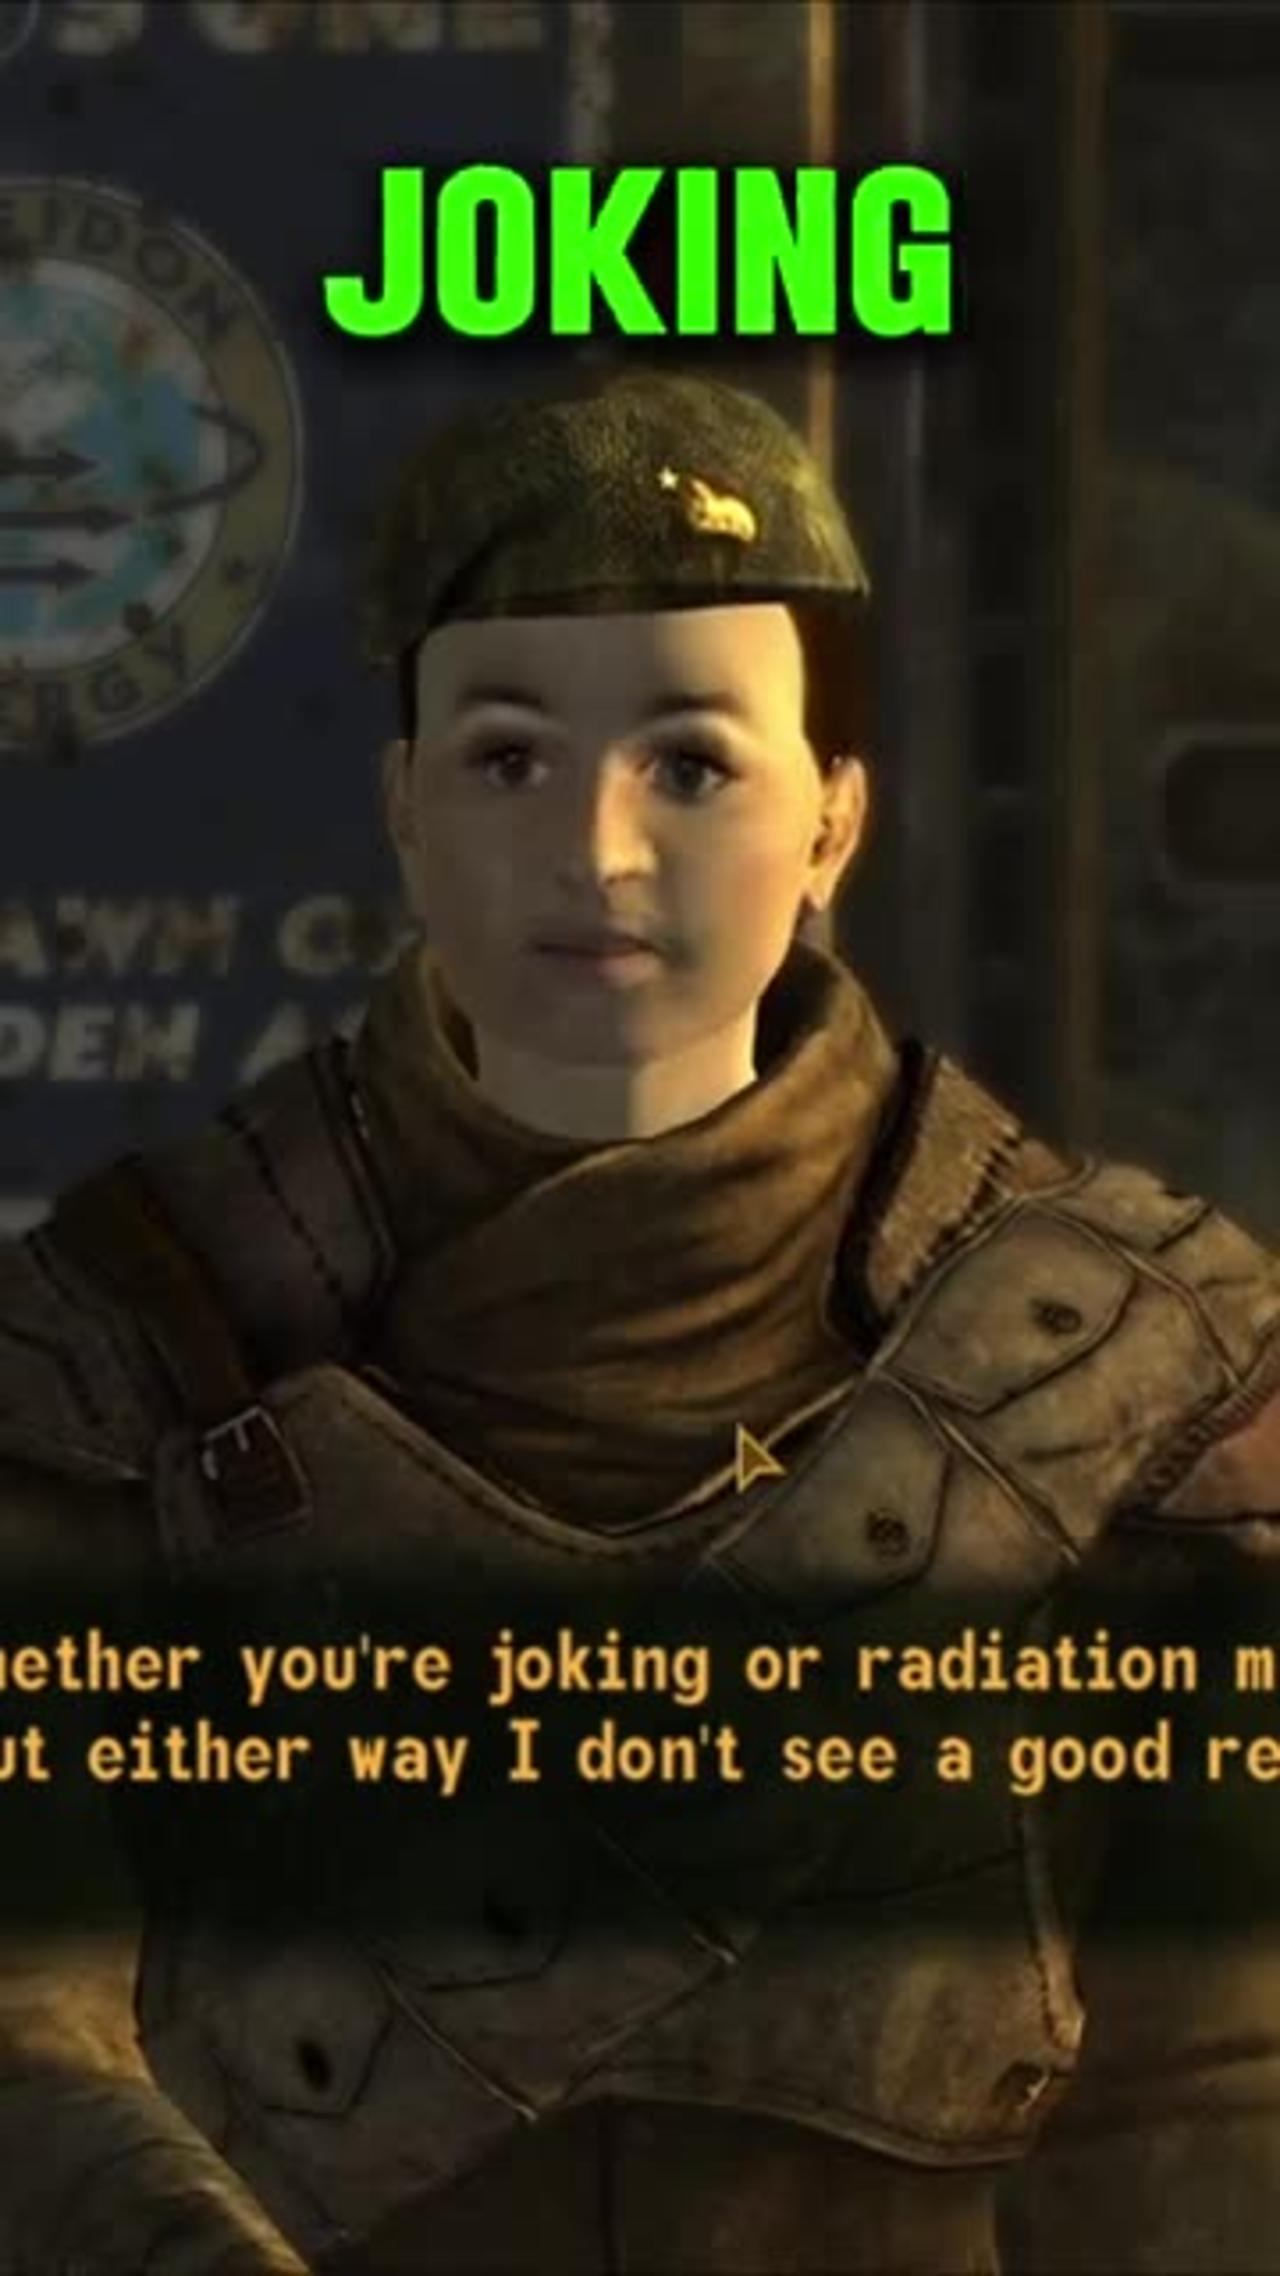 Low Intelligence in Fallout- New Vegas... #fallout #gaming #shorts